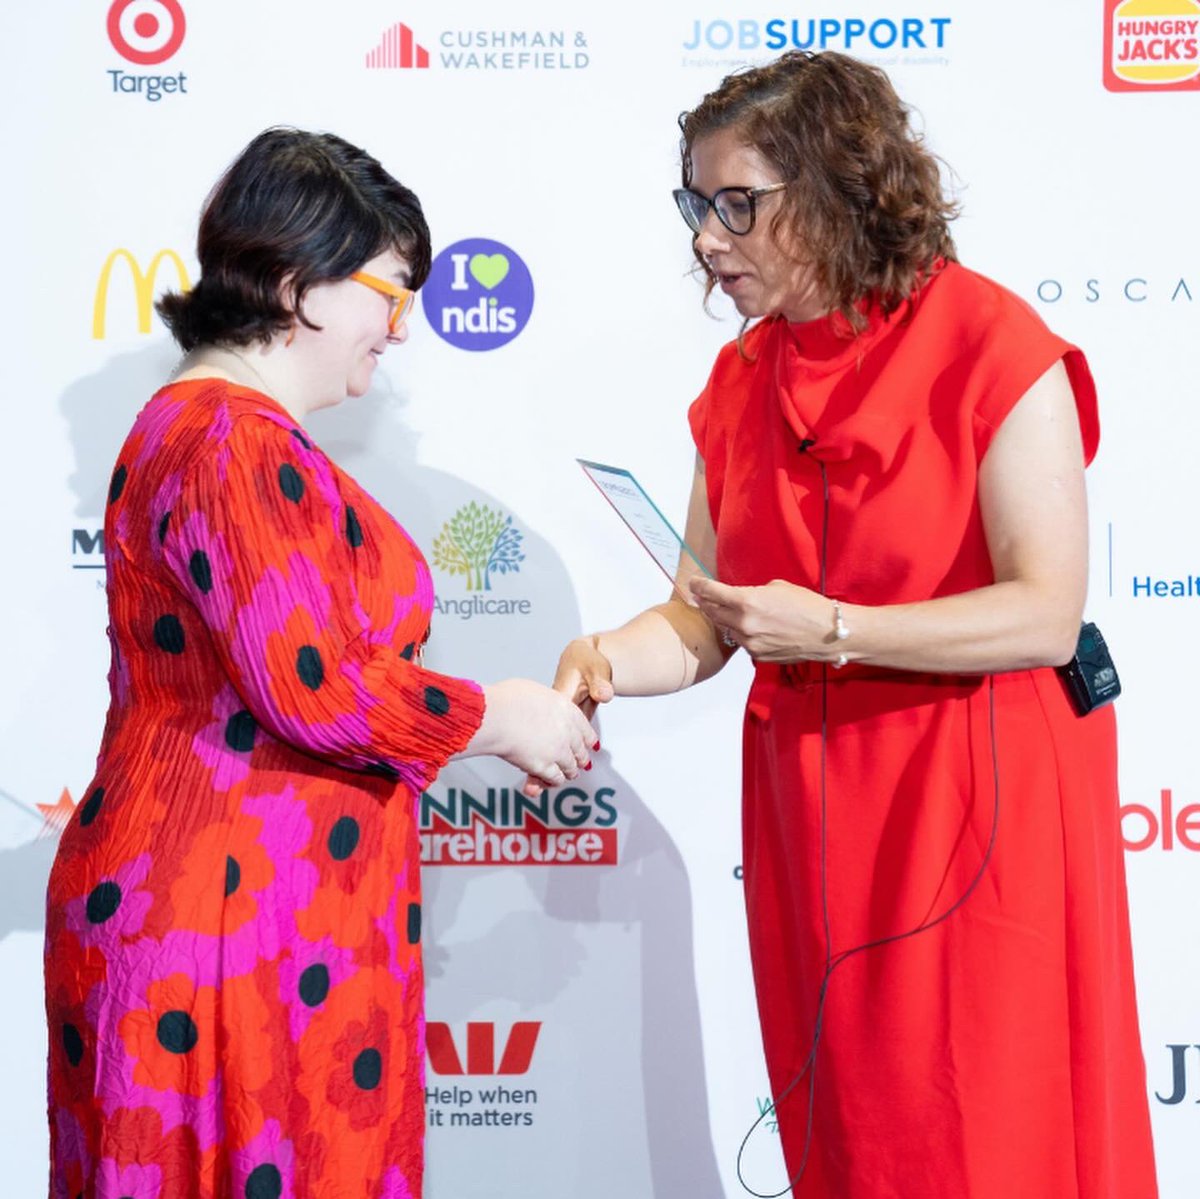 Congrats to Dina Kremer for 20+ years at #PLCSydney, celebrated at the Jobsupport awards👏Recognising the contributions of people with disabilities in the workplace, her service is invaluable🫶 📸Melissa Watters (Head of Junior School), Dina & @AmandaRishworth